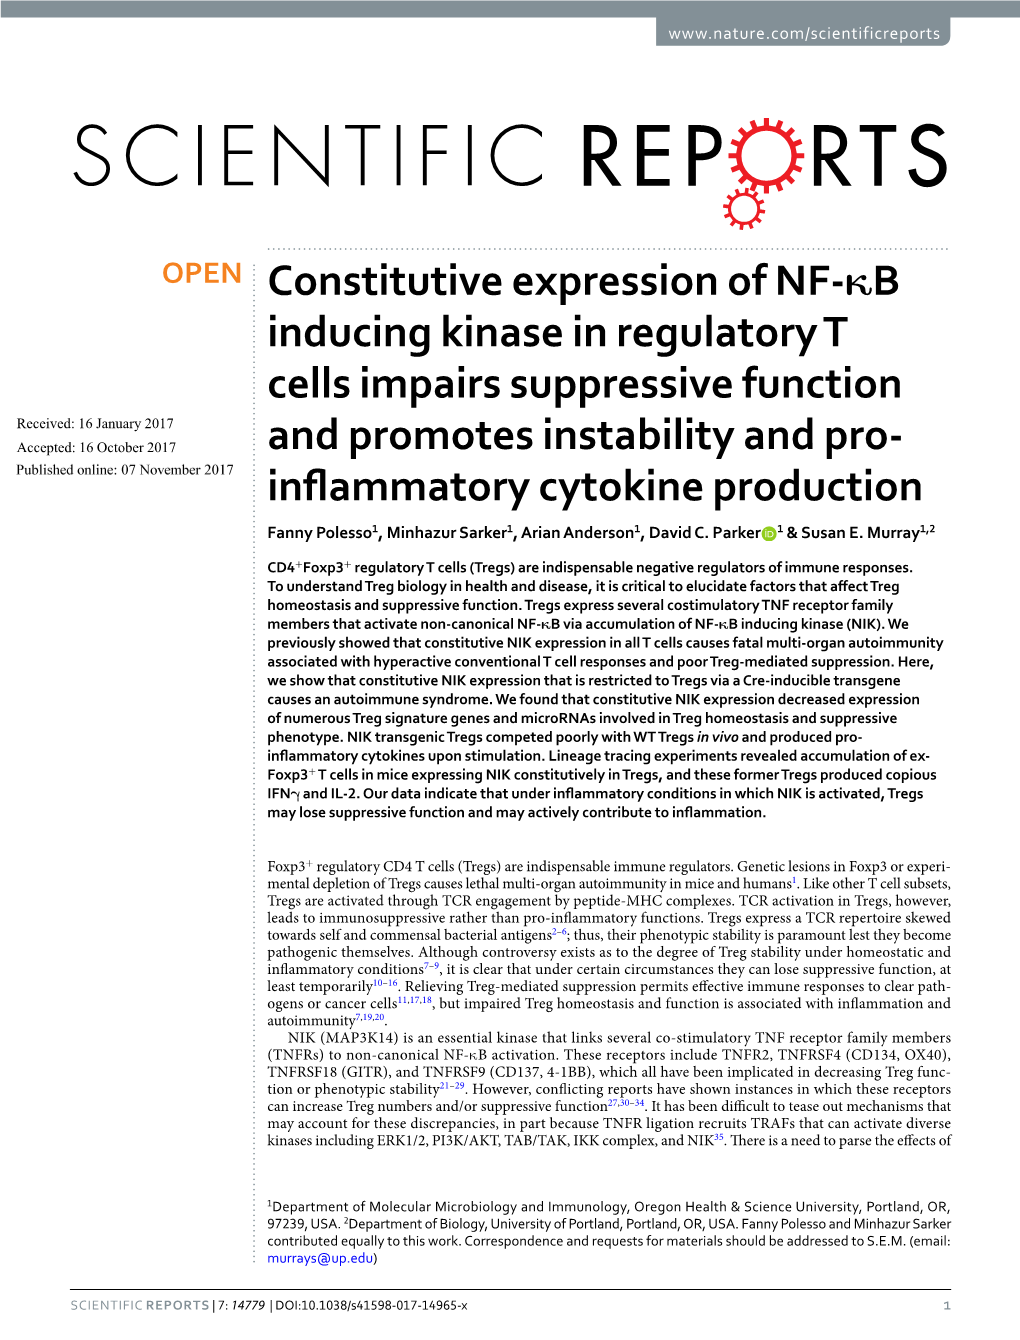 Constitutive Expression of NF-Κb Inducing Kinase in Regulatory T Cells